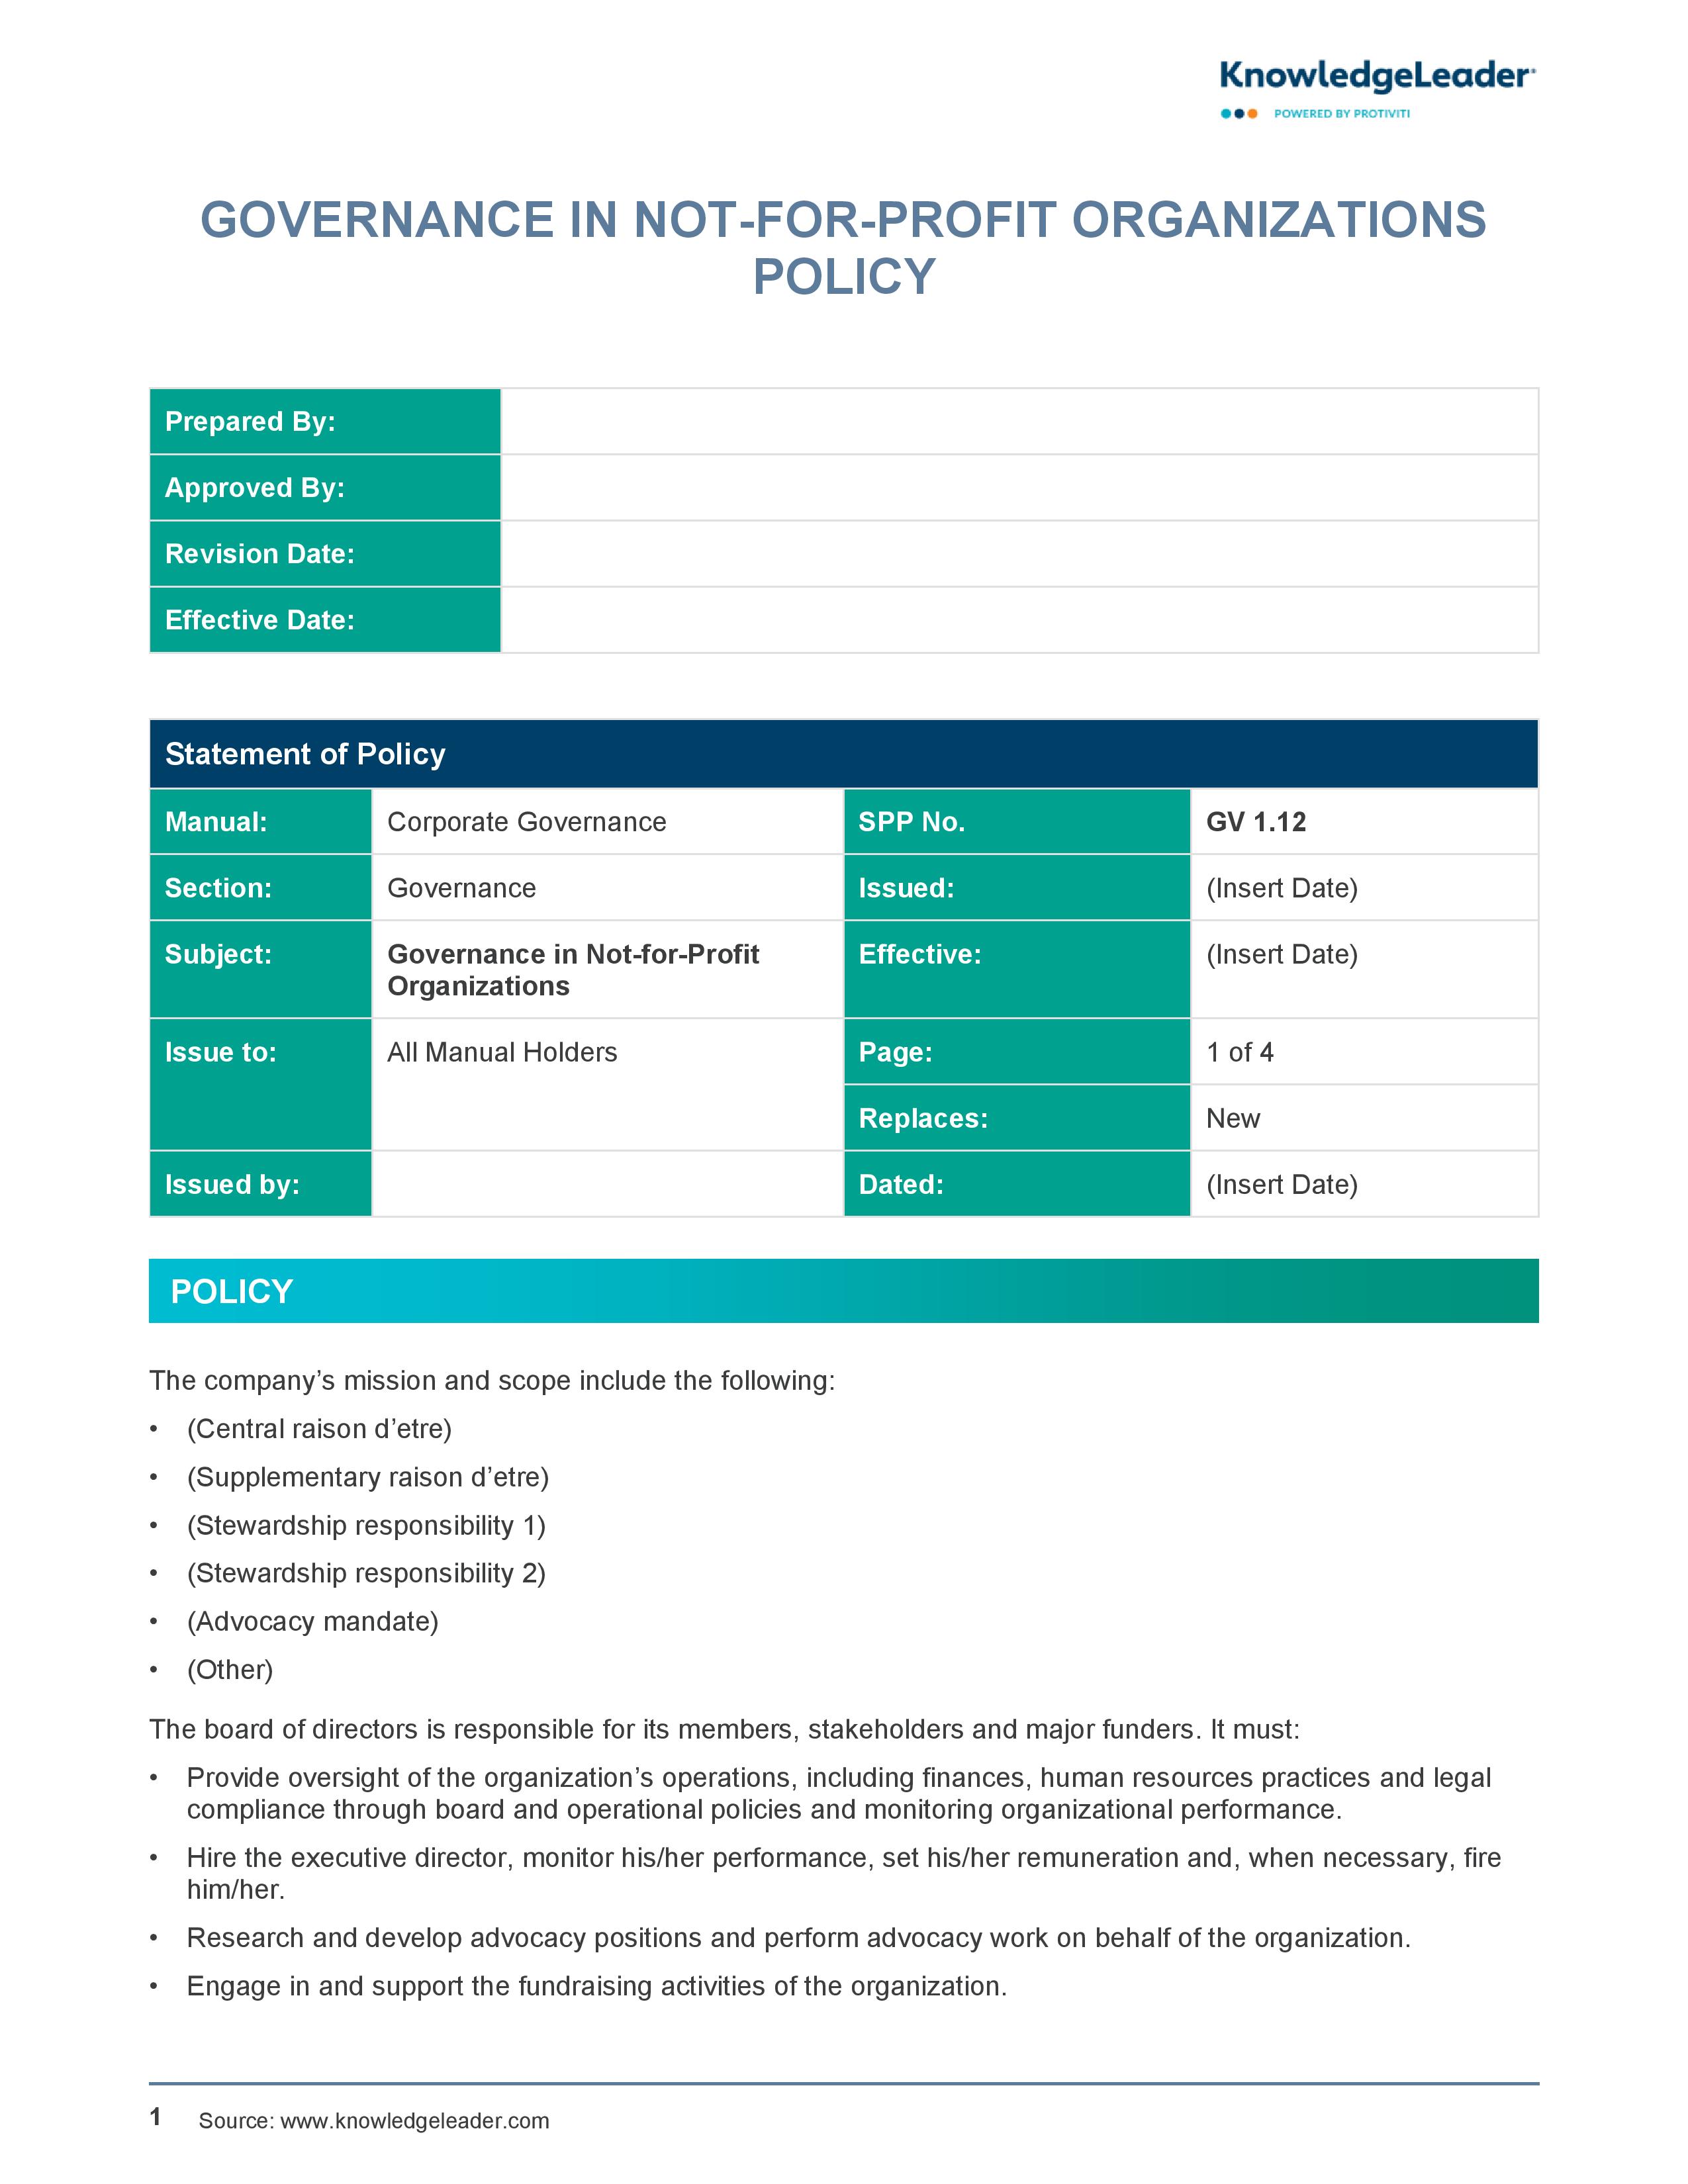 Screenshot of the first page of Governance in Not-For-Profit Organizations Policy